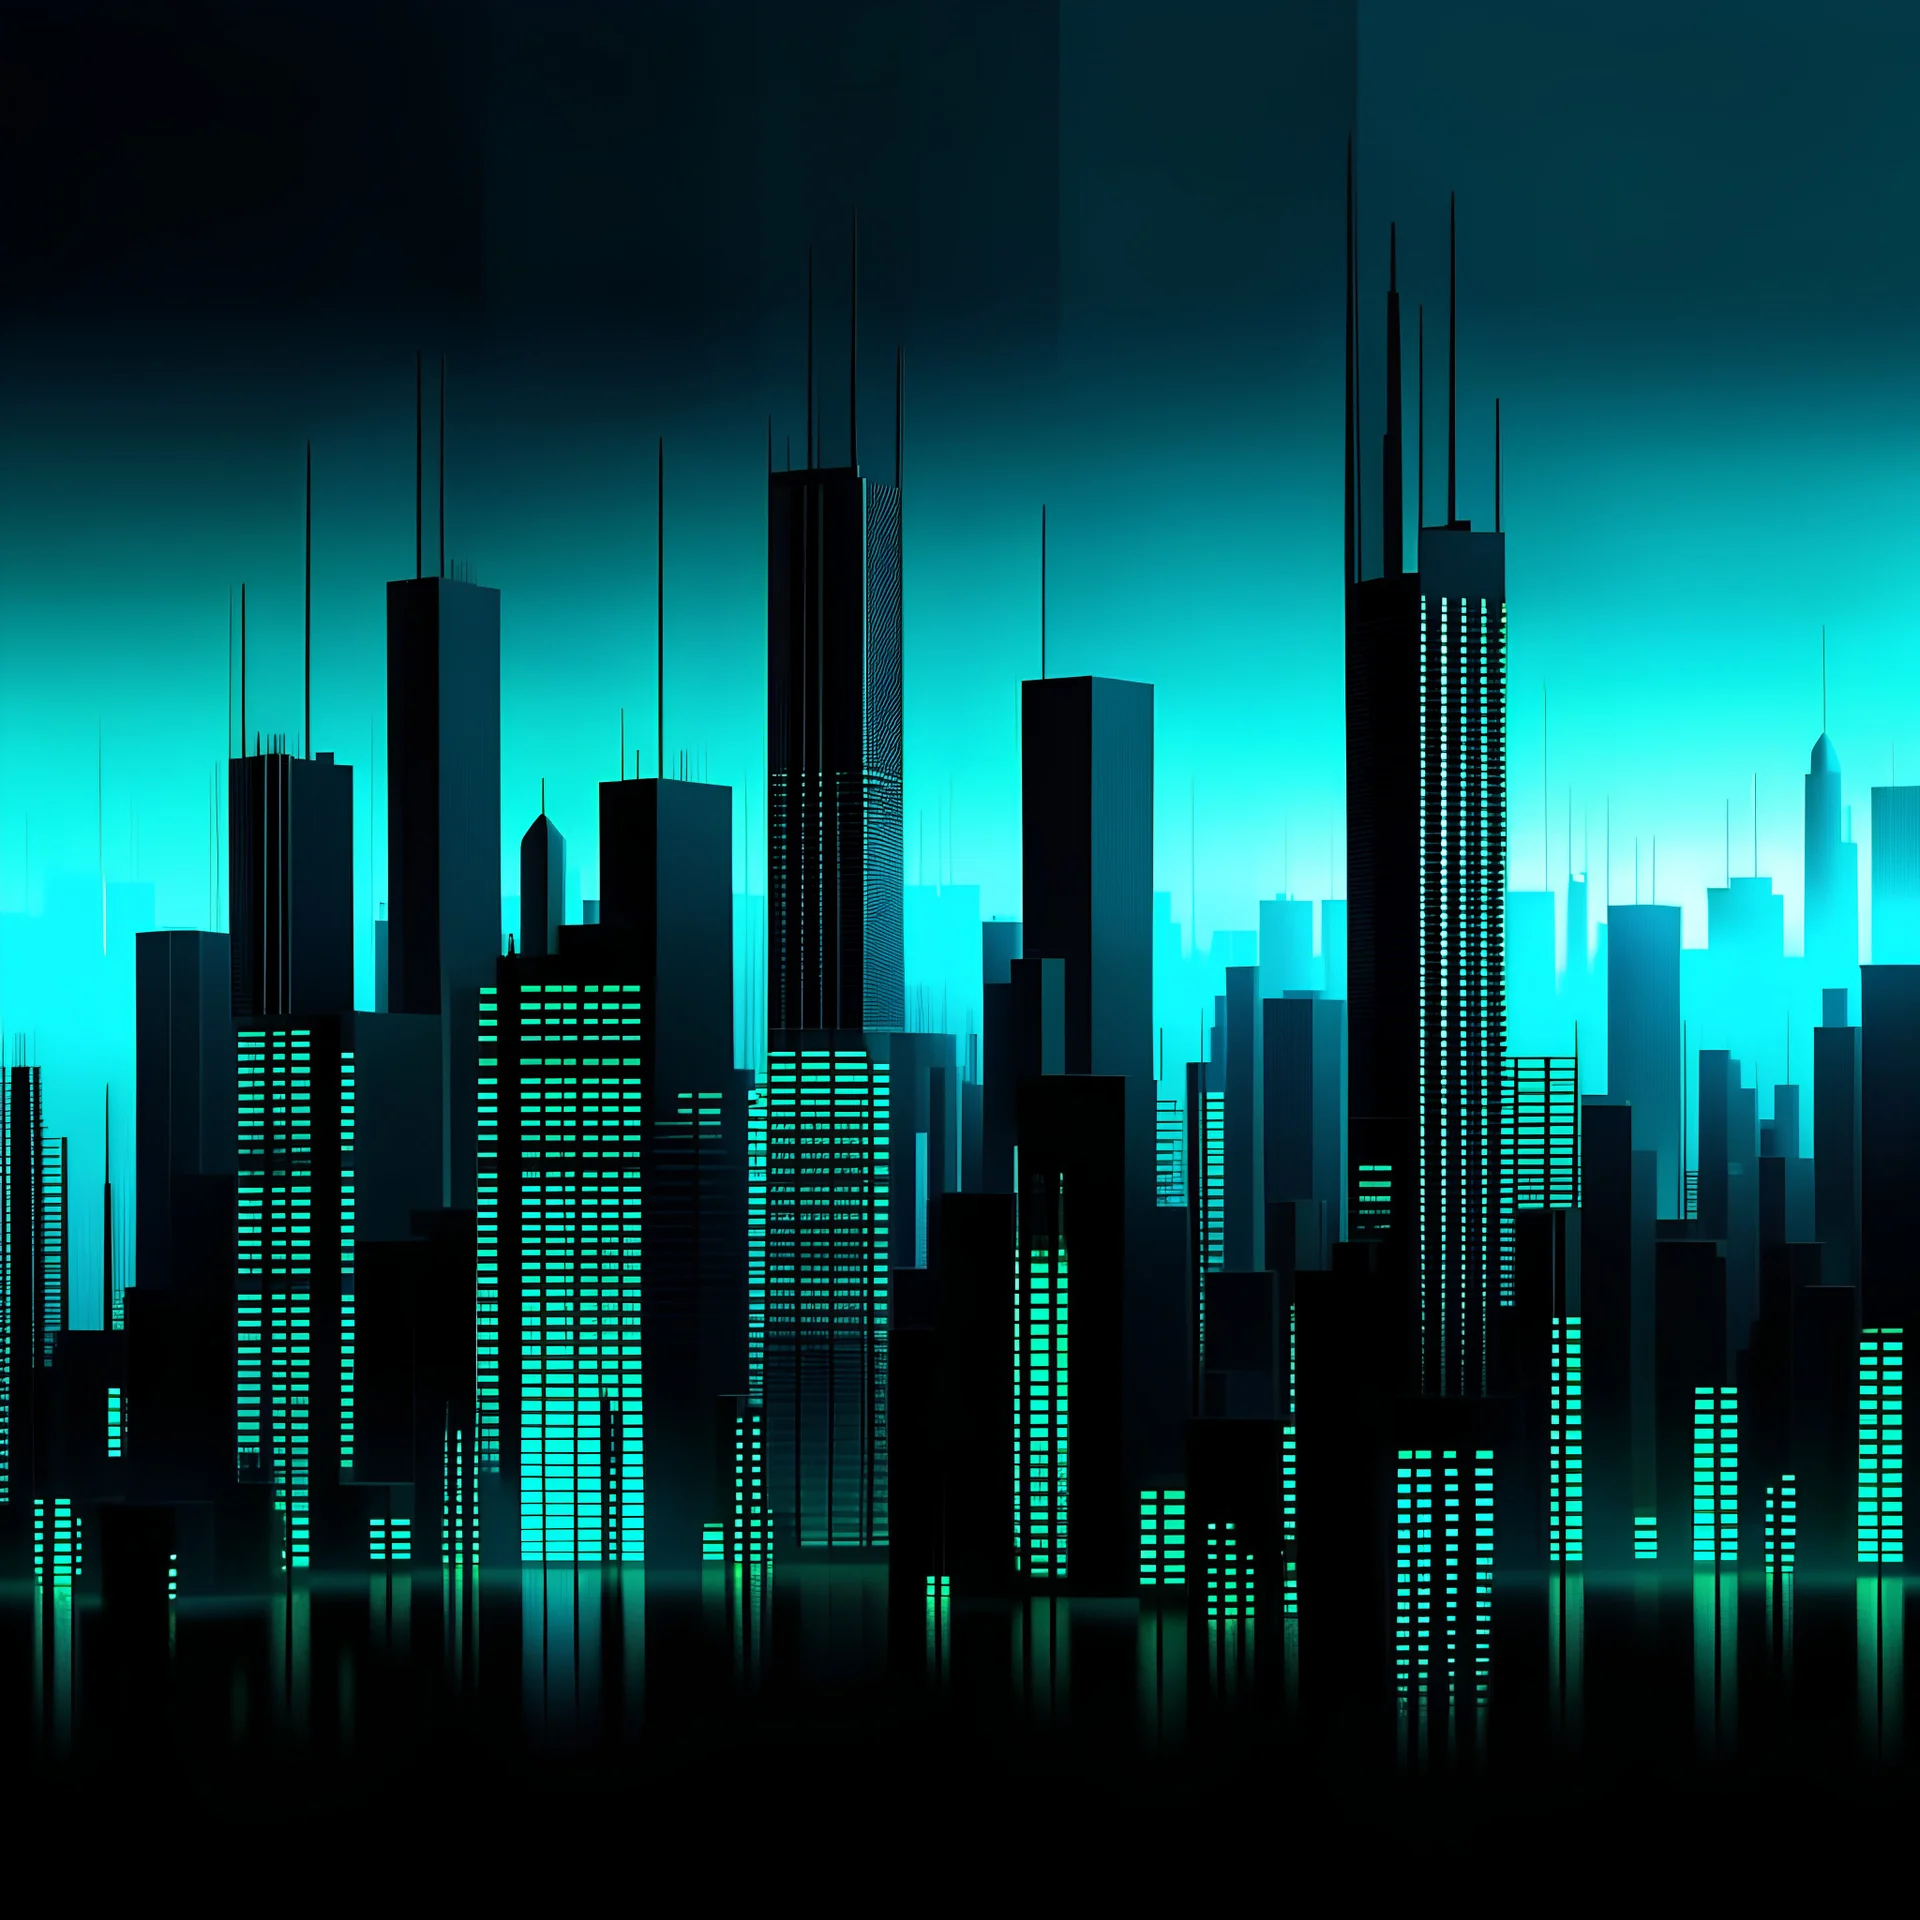 Digital illustration of a minimalist and digital city, colors are black, light blue and light green (#CCE7D5).